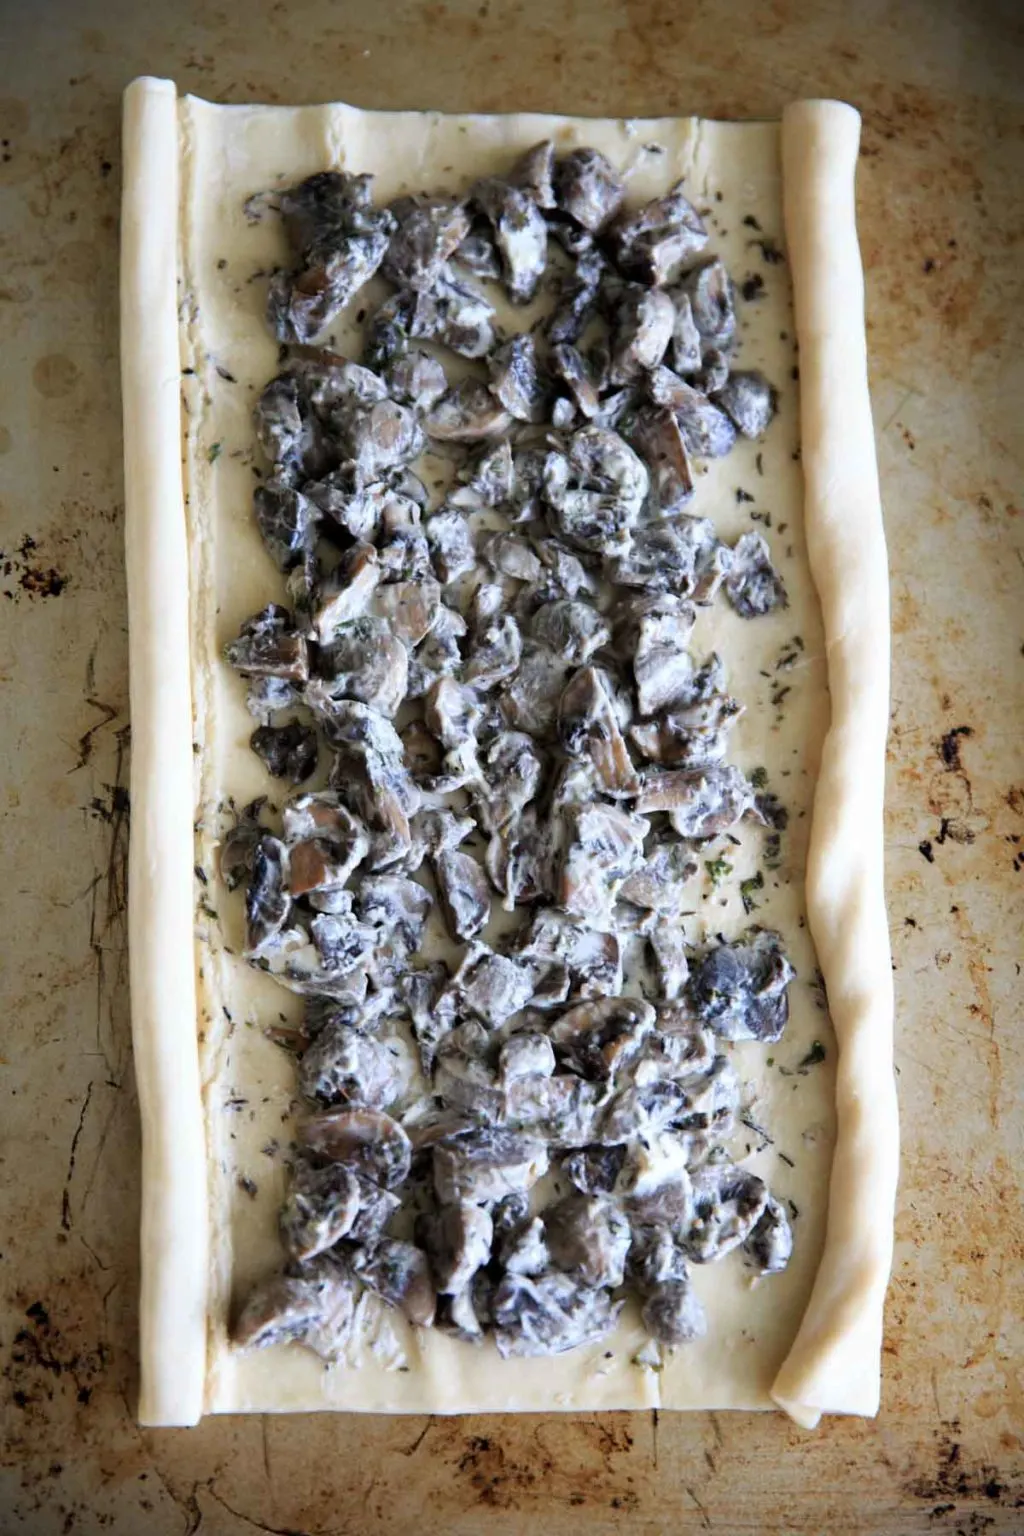 mushrooms spread out on puff pastry sheet before rolling into palmiers and baking